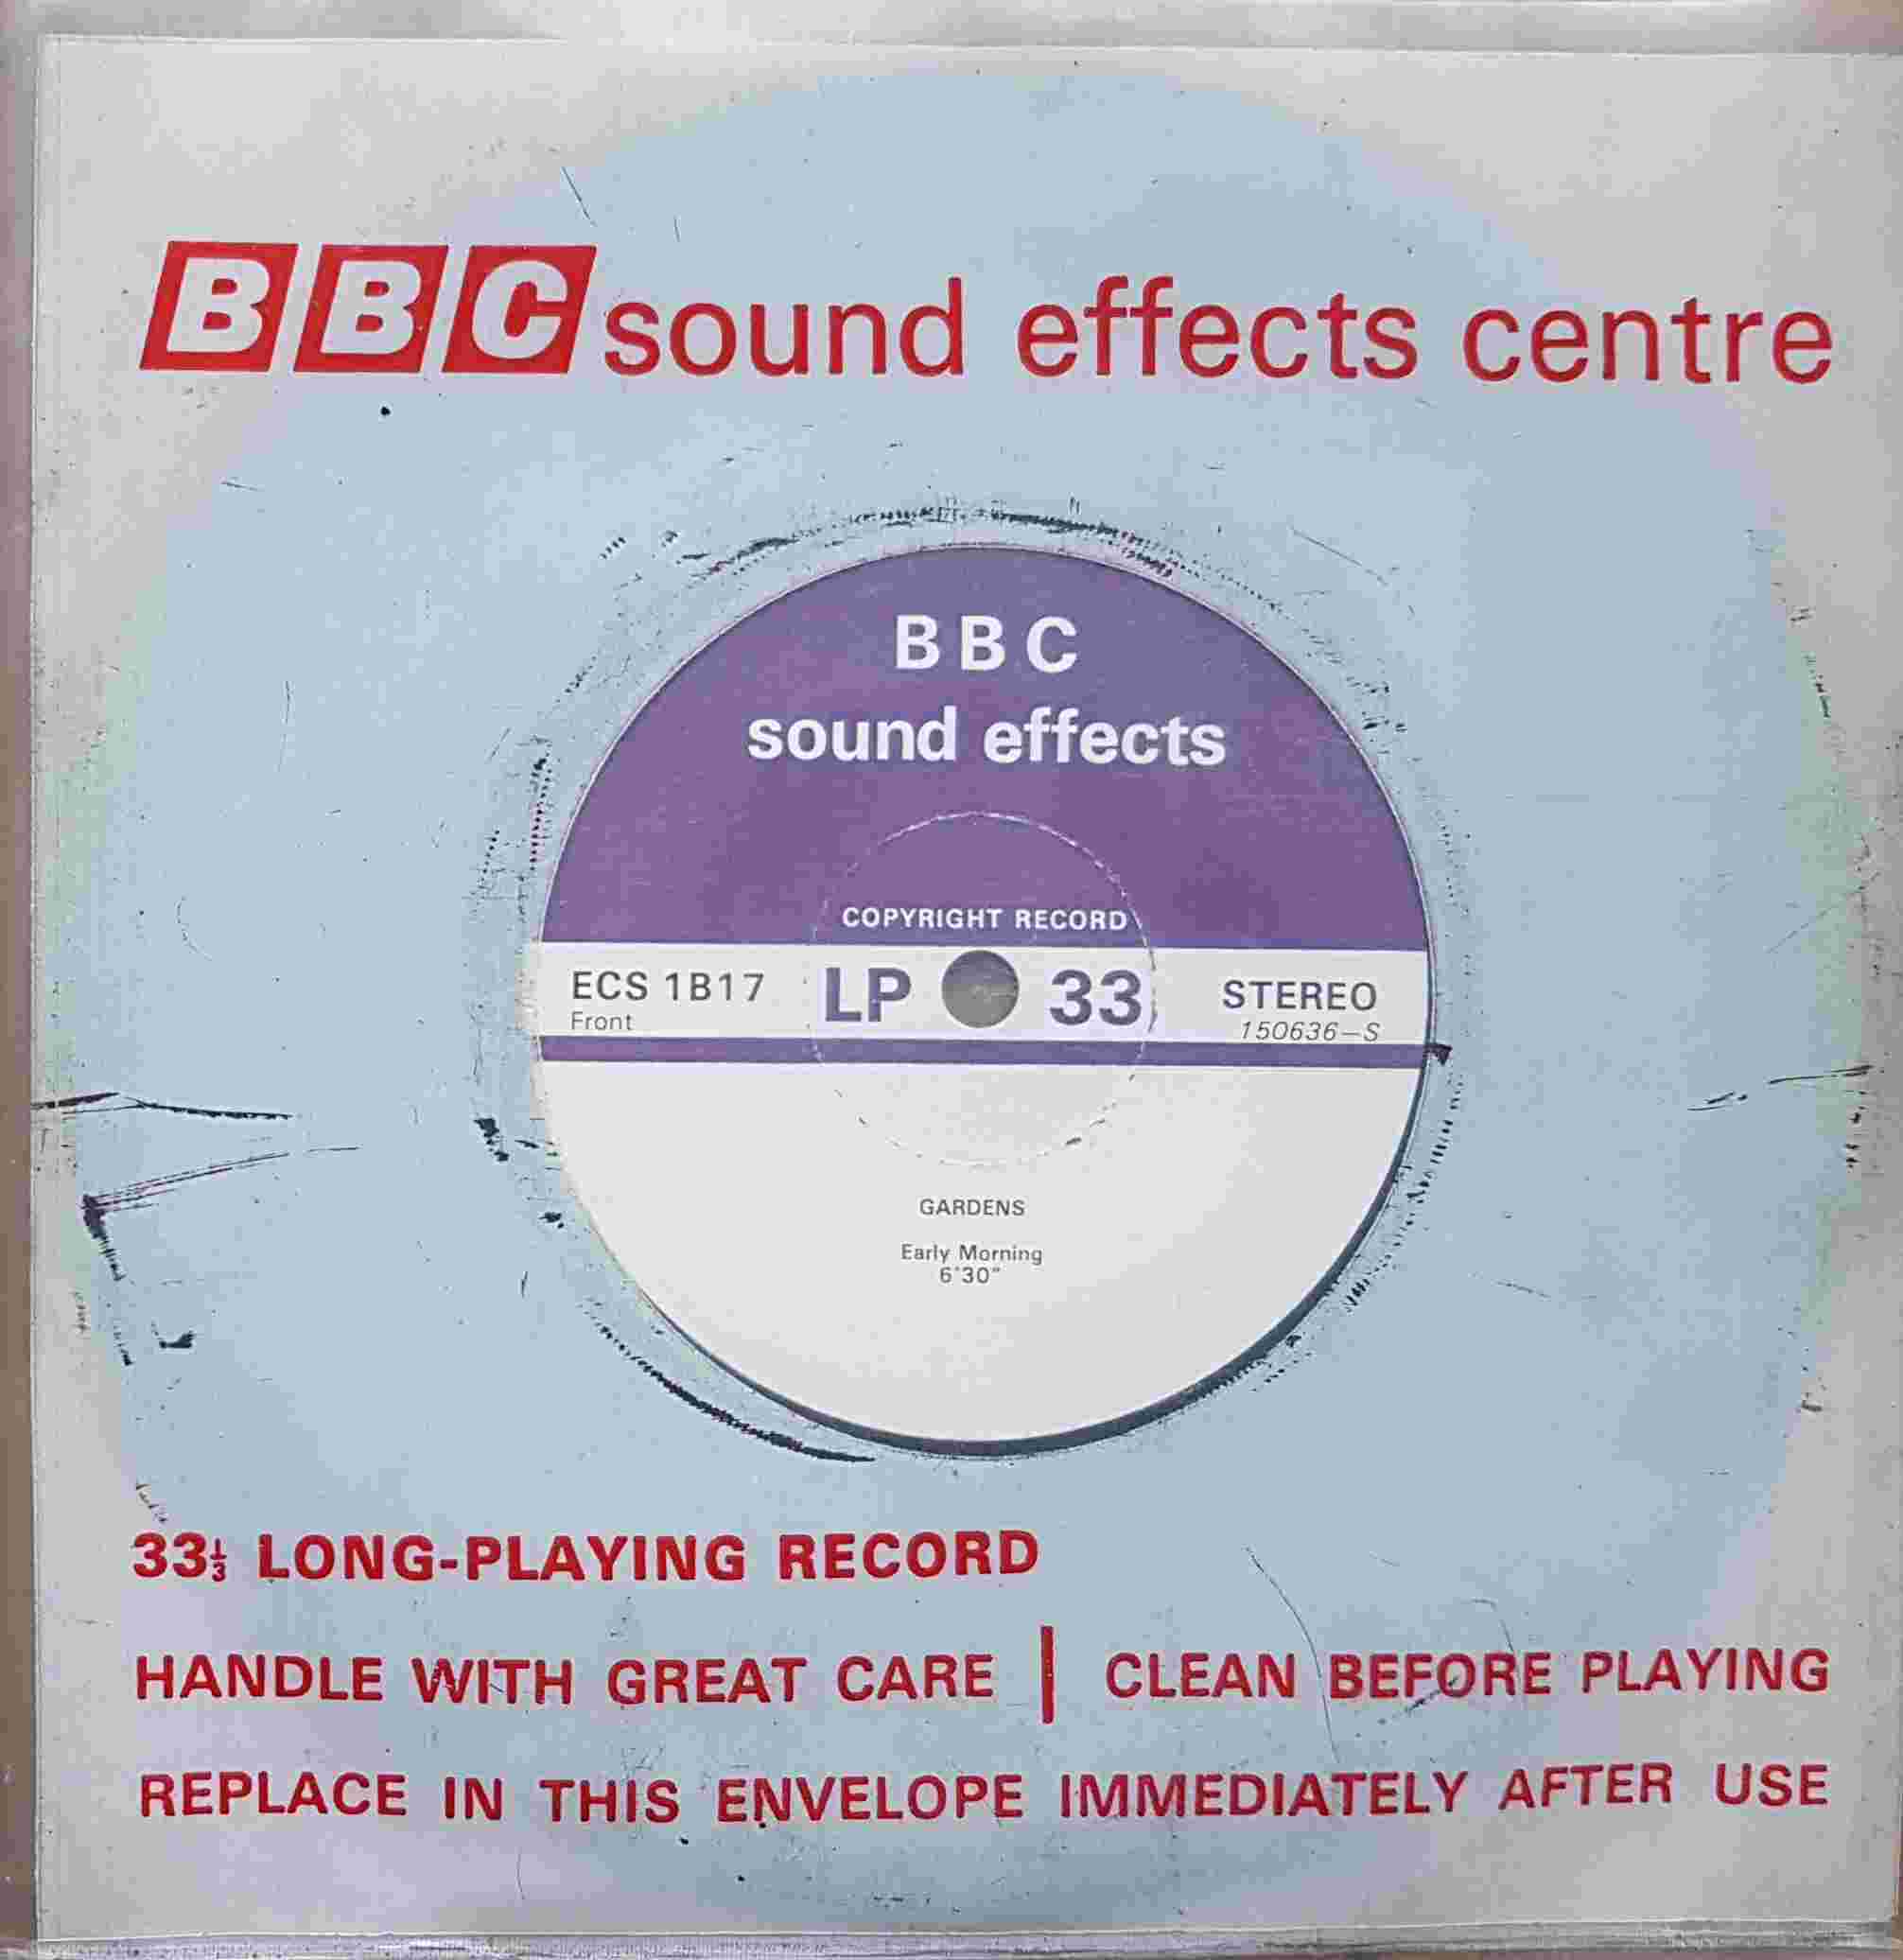 Picture of ECS 1B17 Gardens by artist Not registered from the BBC singles - Records and Tapes library